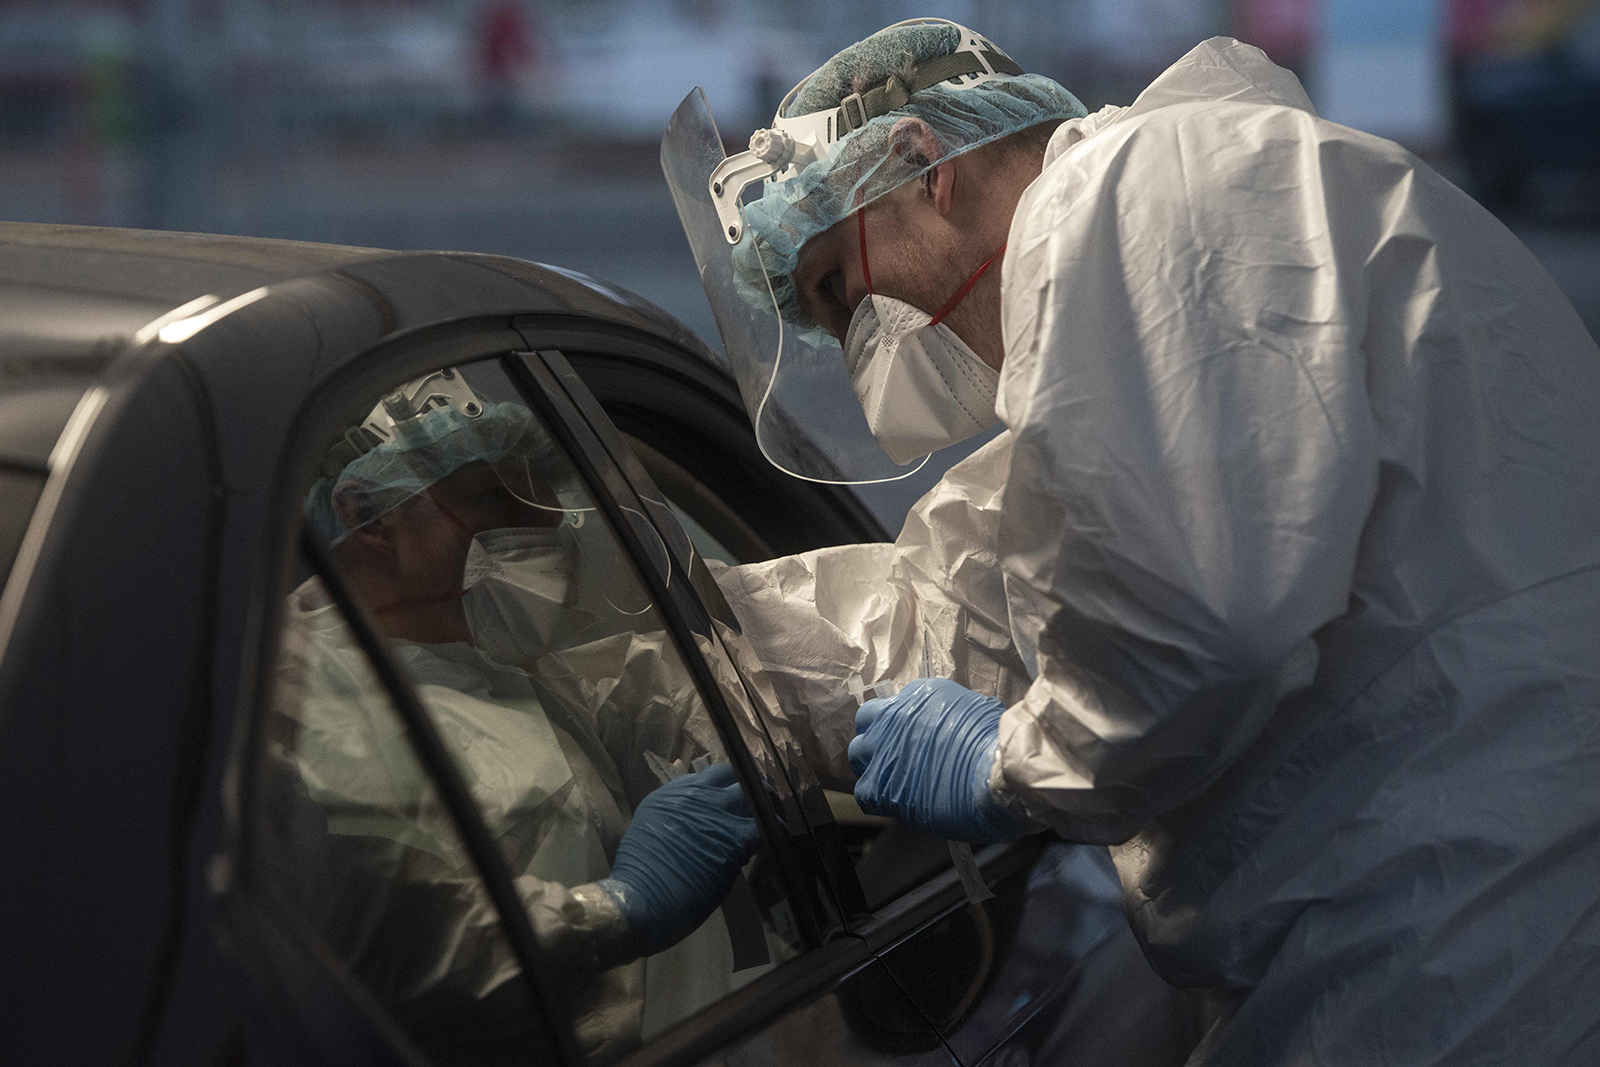 A medical worker wearing protective equipment takes a sample at a drive-in Covid-19 testing station in Prague, Czech Republic, on February 23.